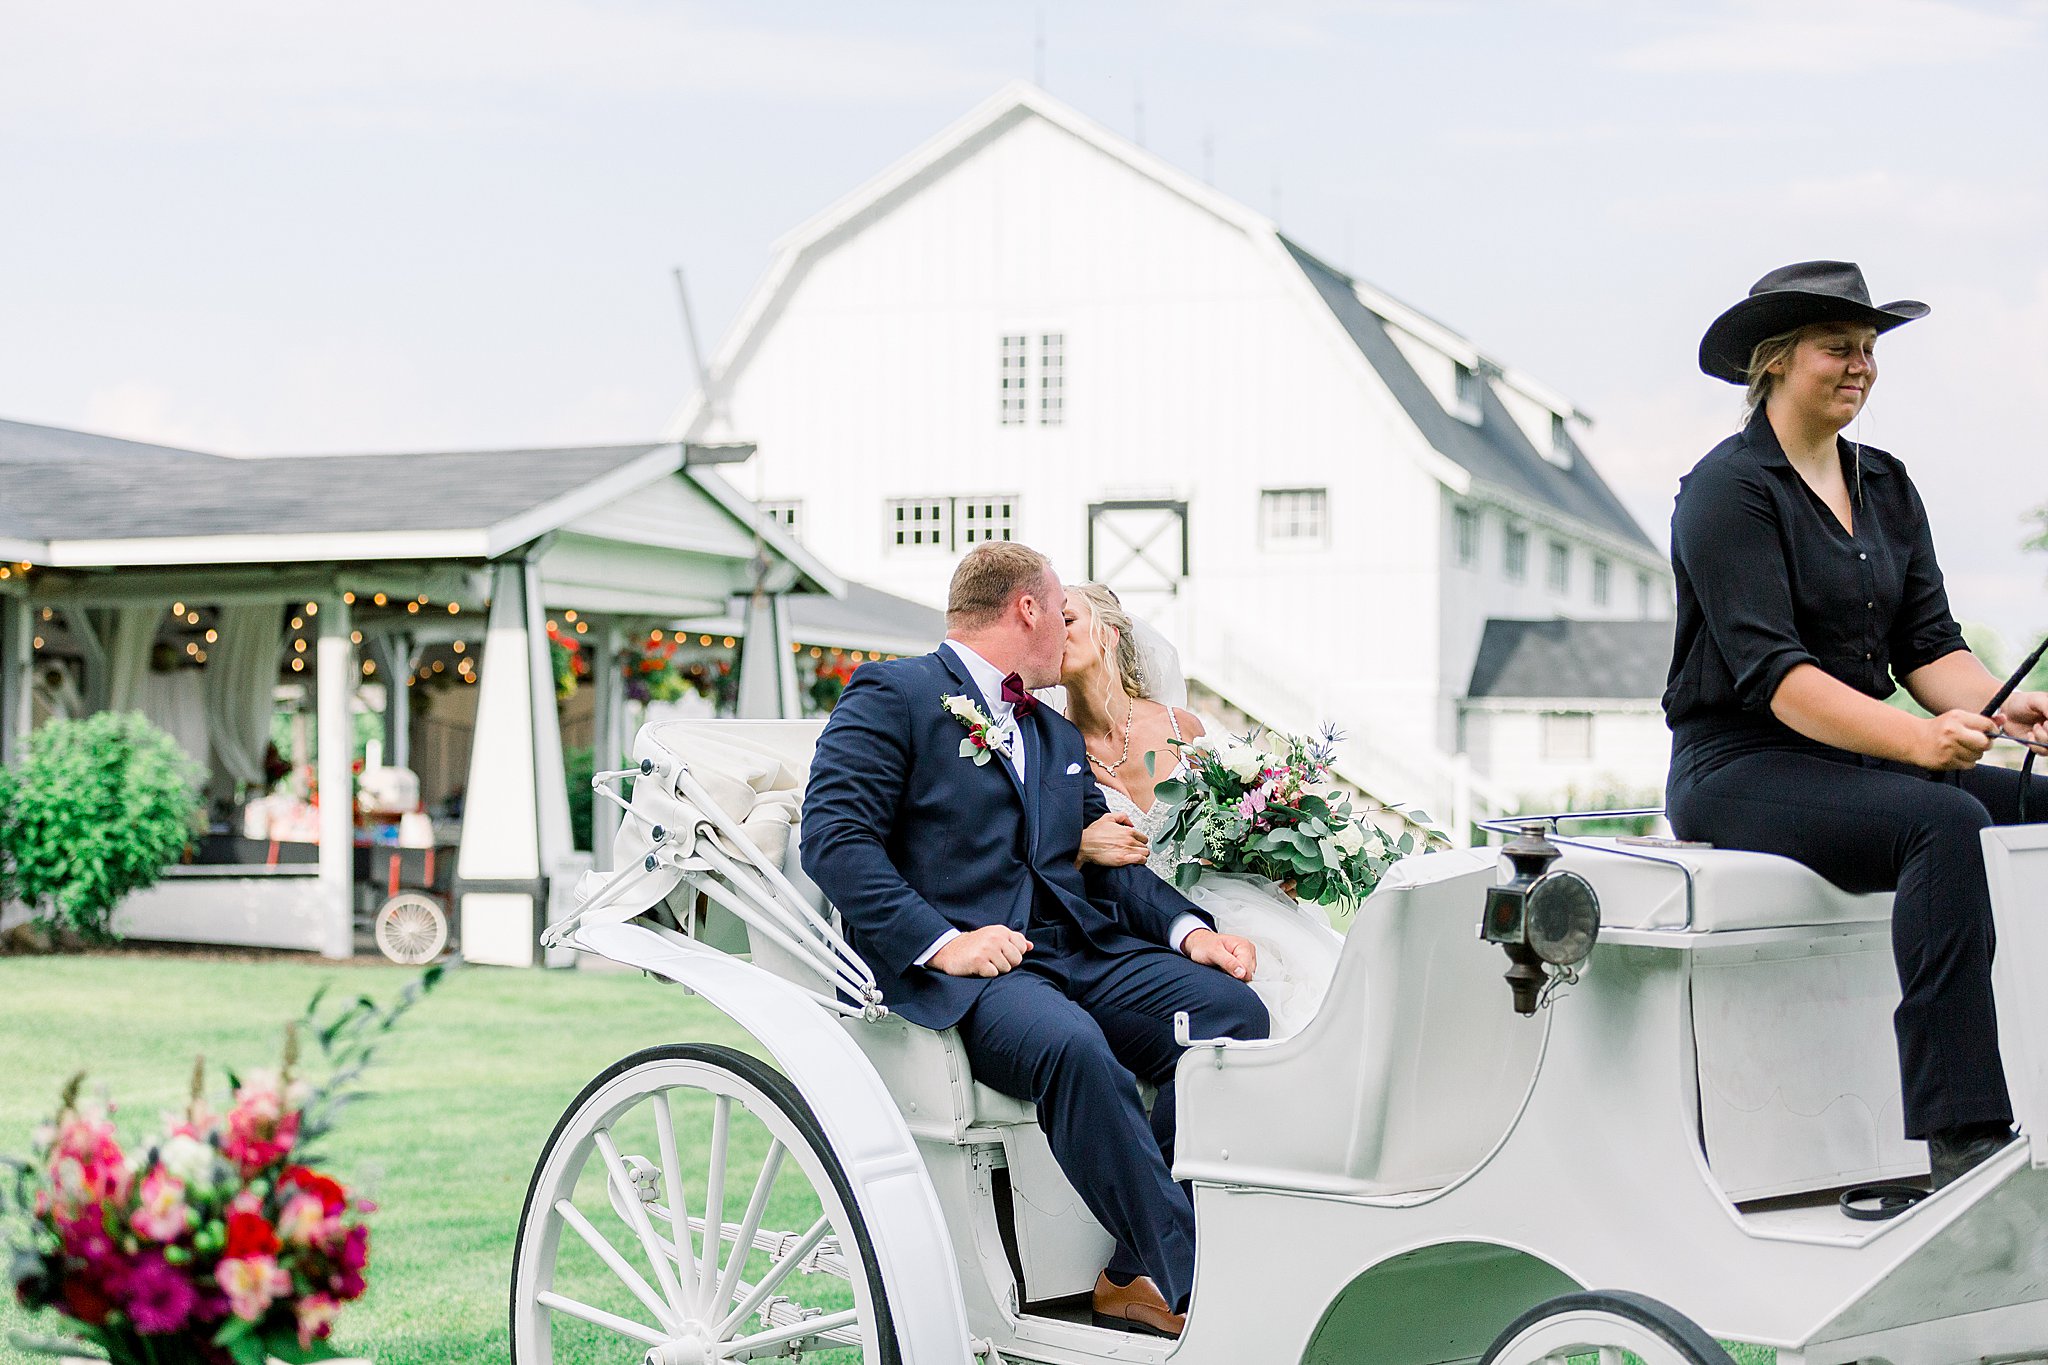 Bride and groom kiss while leaving ceremony in horse drawn carriage at Post Family Farm Wedding